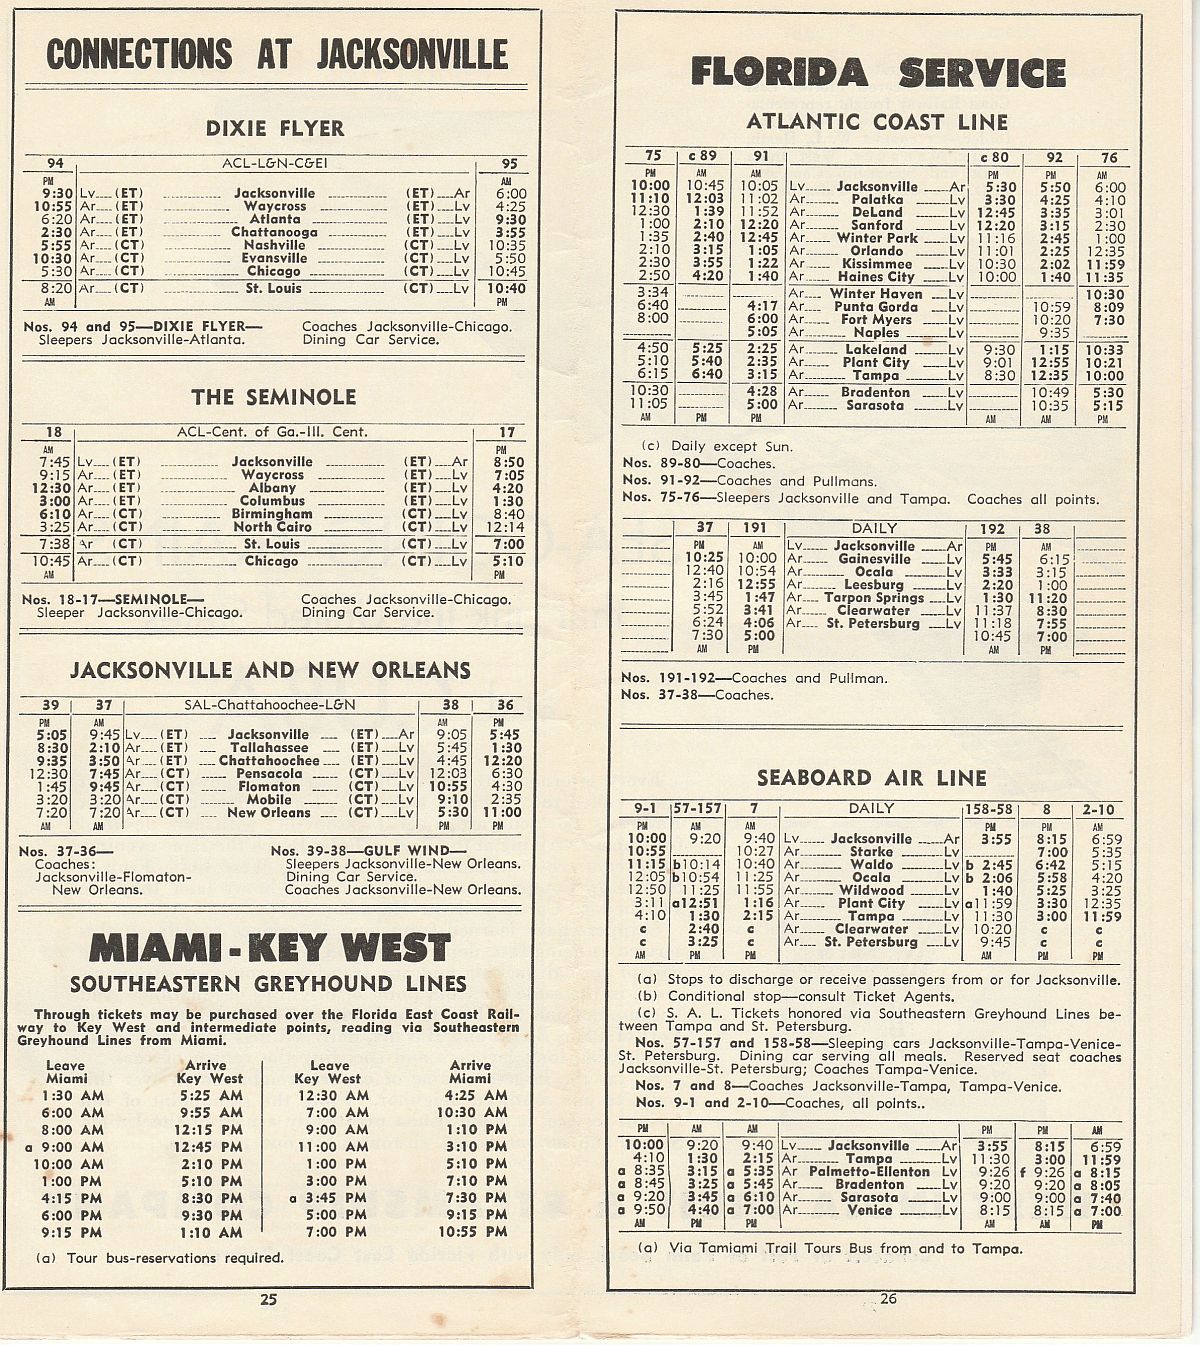 Florida East Coast Railway Dec. 12, 1957 timetable Pg. 25-26: More Connections at Jacksonville Connecting trains F.E.C. at Jacksonville with the Atlantic Coast Line, Louisville & Nashville, Chicago & Eastern Illinois, Central of Georgia, Illinois Central and Seaboard